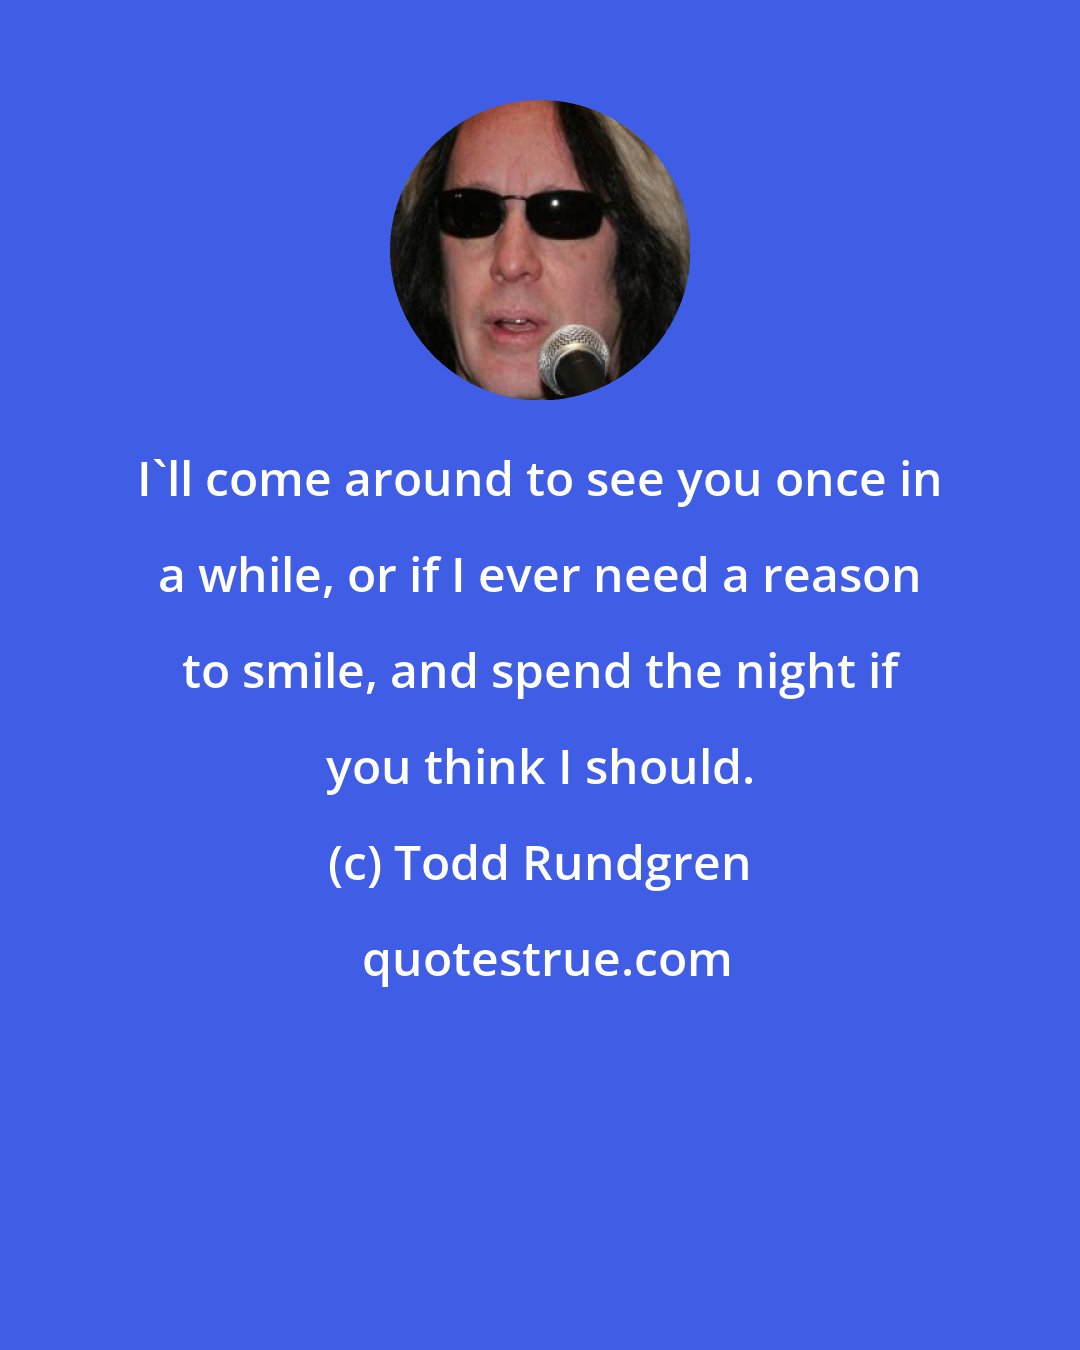 Todd Rundgren: I'll come around to see you once in a while, or if I ever need a reason to smile, and spend the night if you think I should.